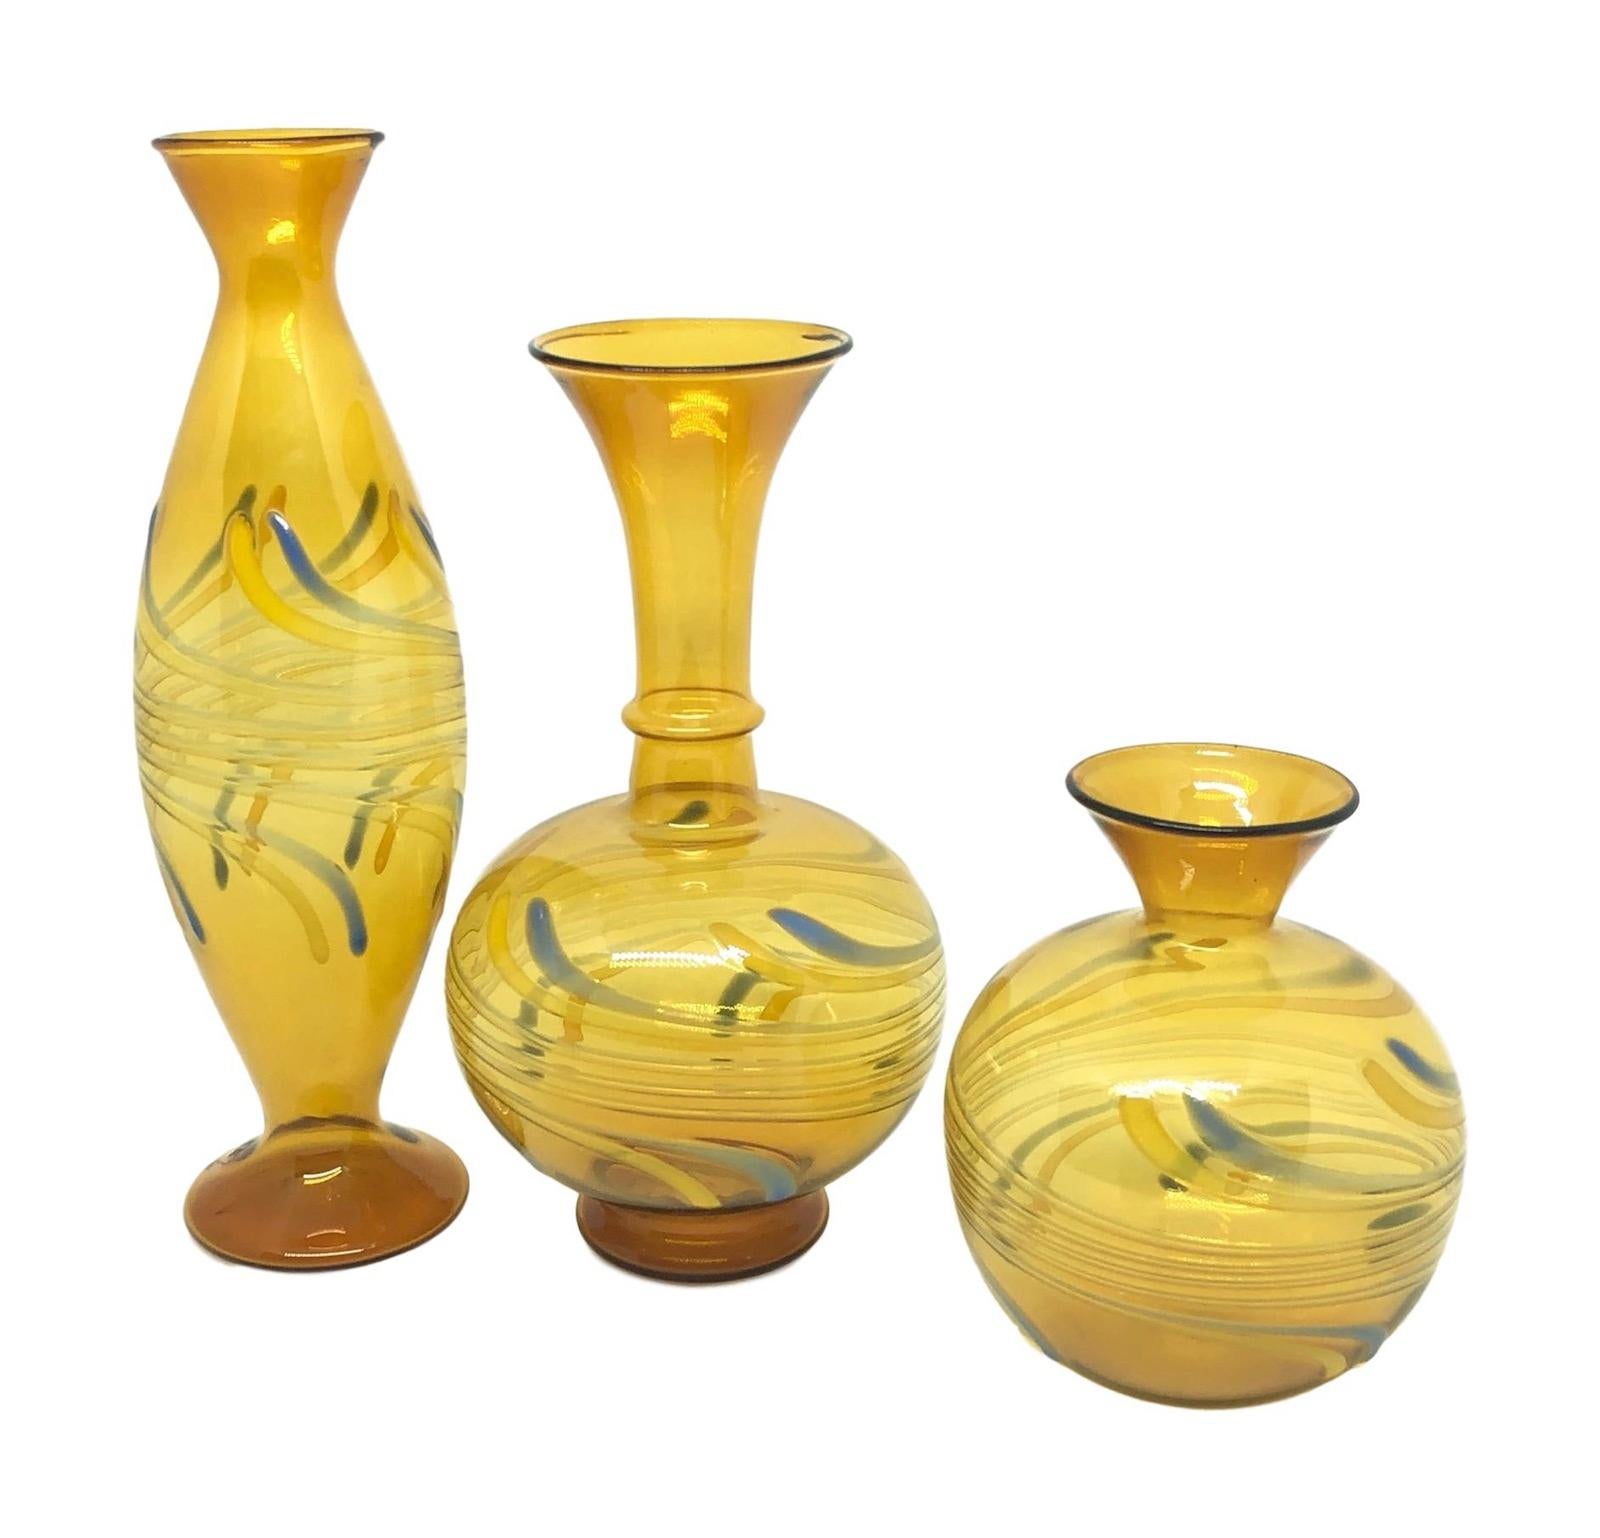 Set of three Classic mid-20th century hand blown glass vases, in the style of Bimini. Very good vintage condition, consistent with age and use. Tallest Vase is approx. 8 1/4